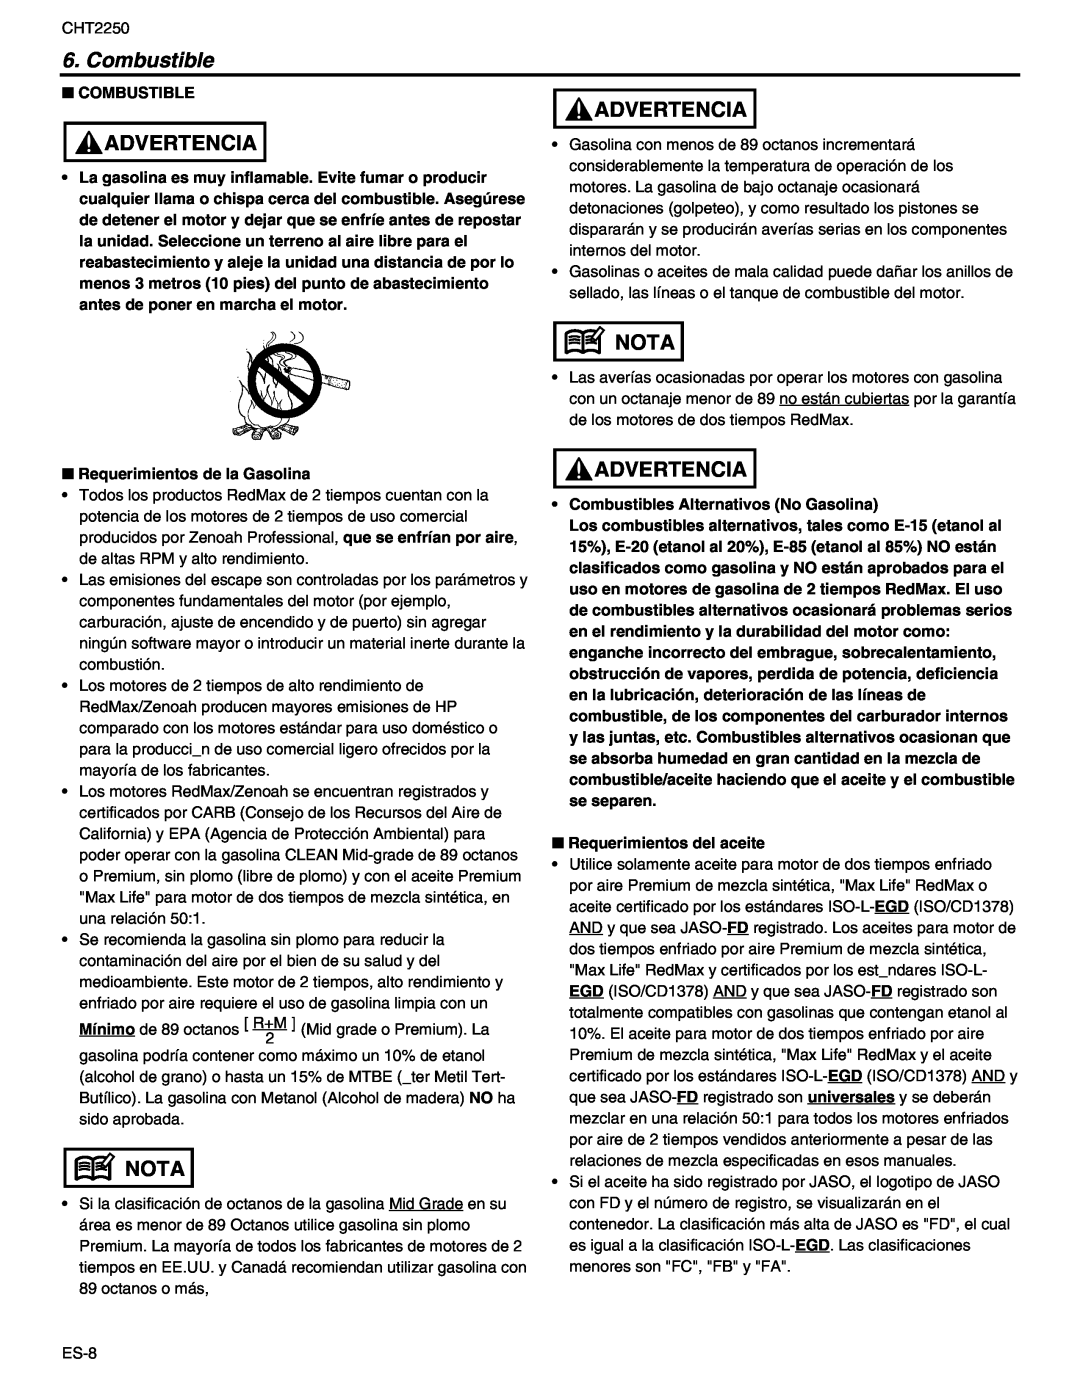 RedMax CHT2250 manual Combustible, Advertencia, Nota 